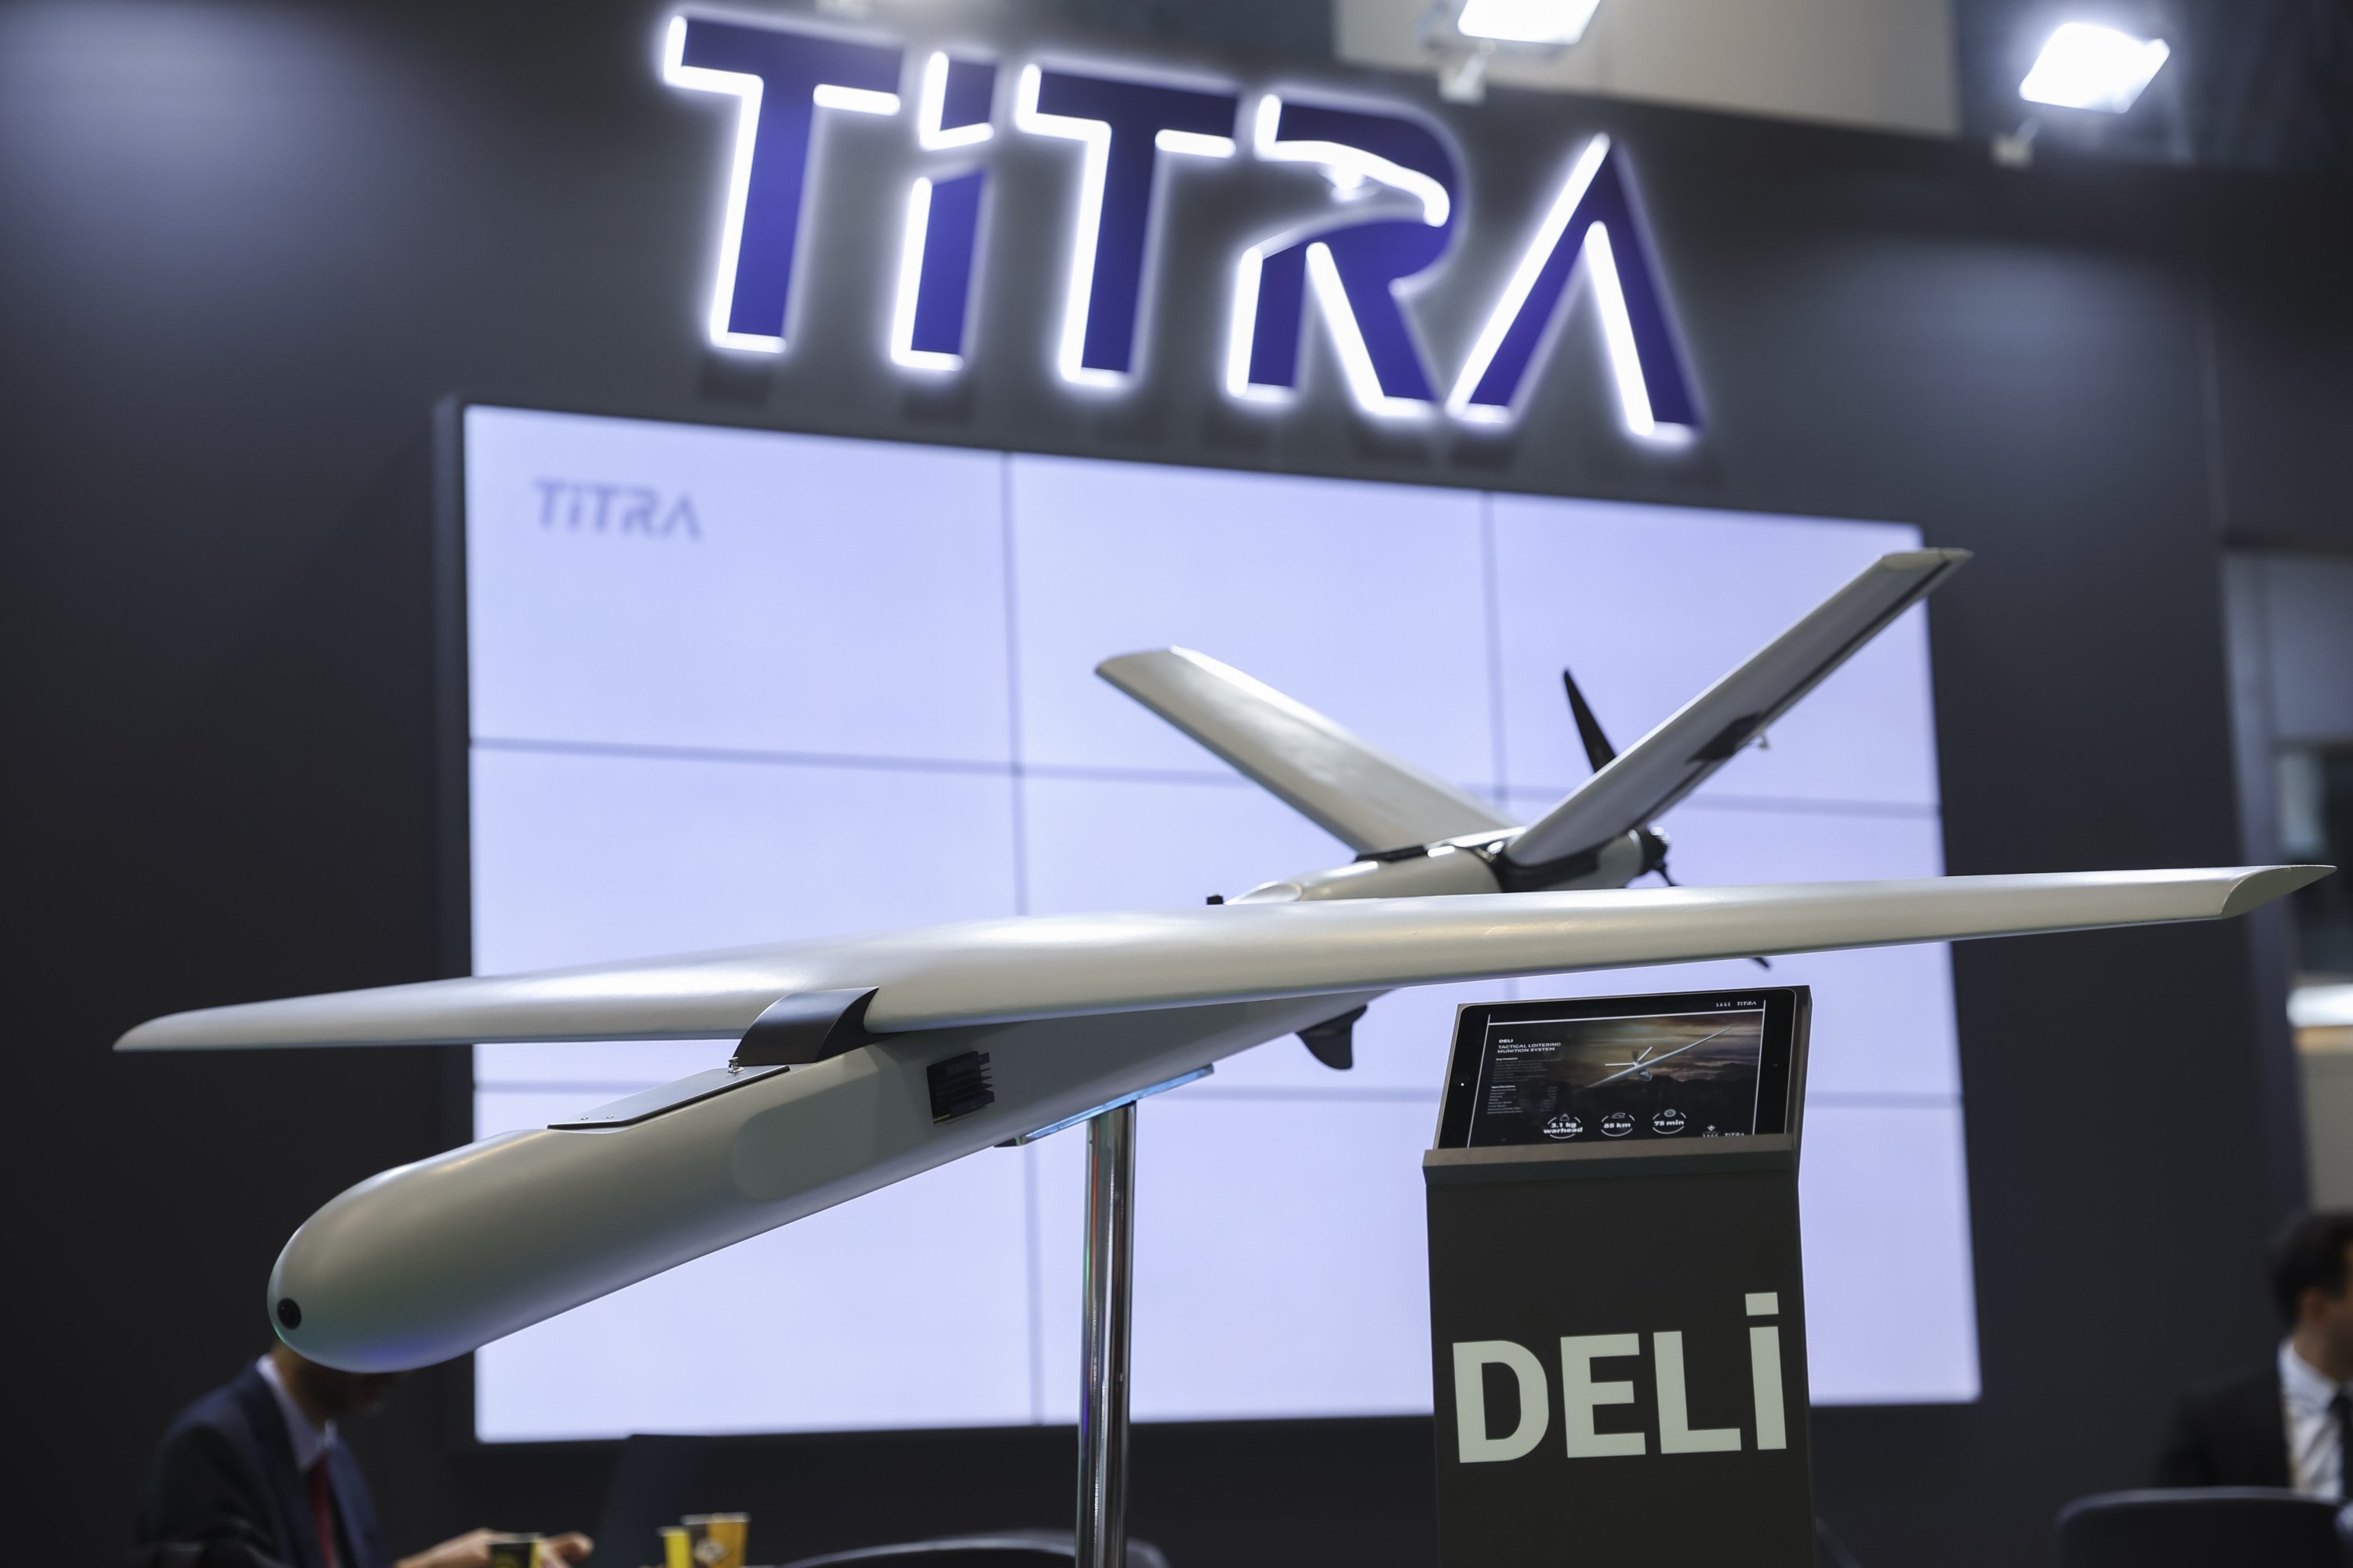 Titra unveils Deli kamikaze drone with 180 km/h speed and a 3.1 kg payload